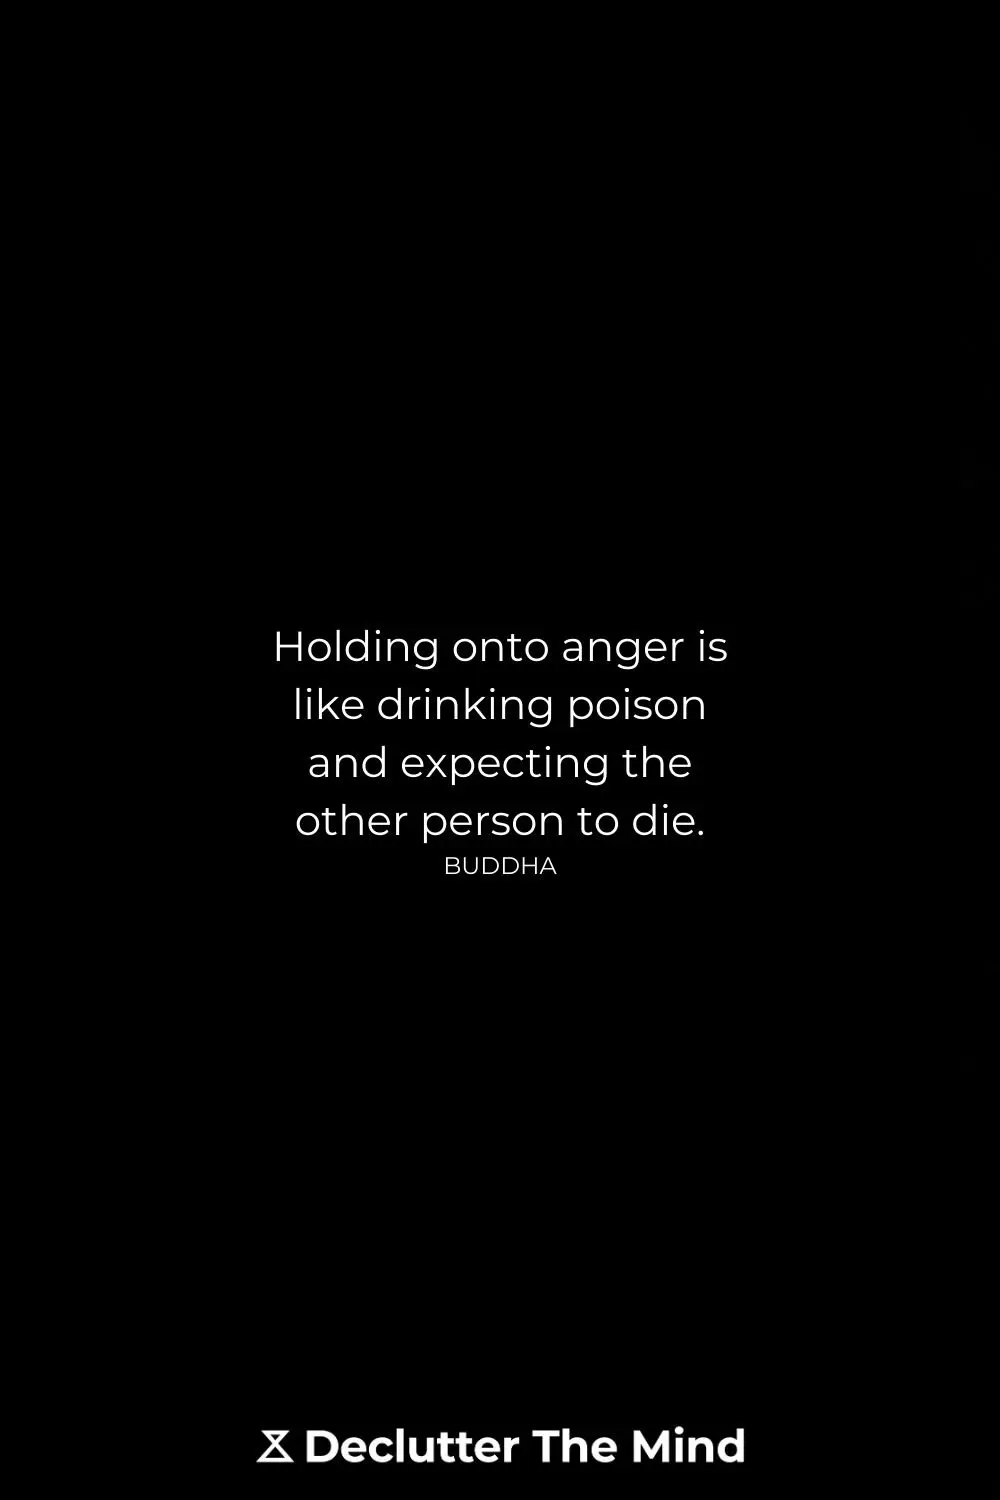 buddha quotes on anger